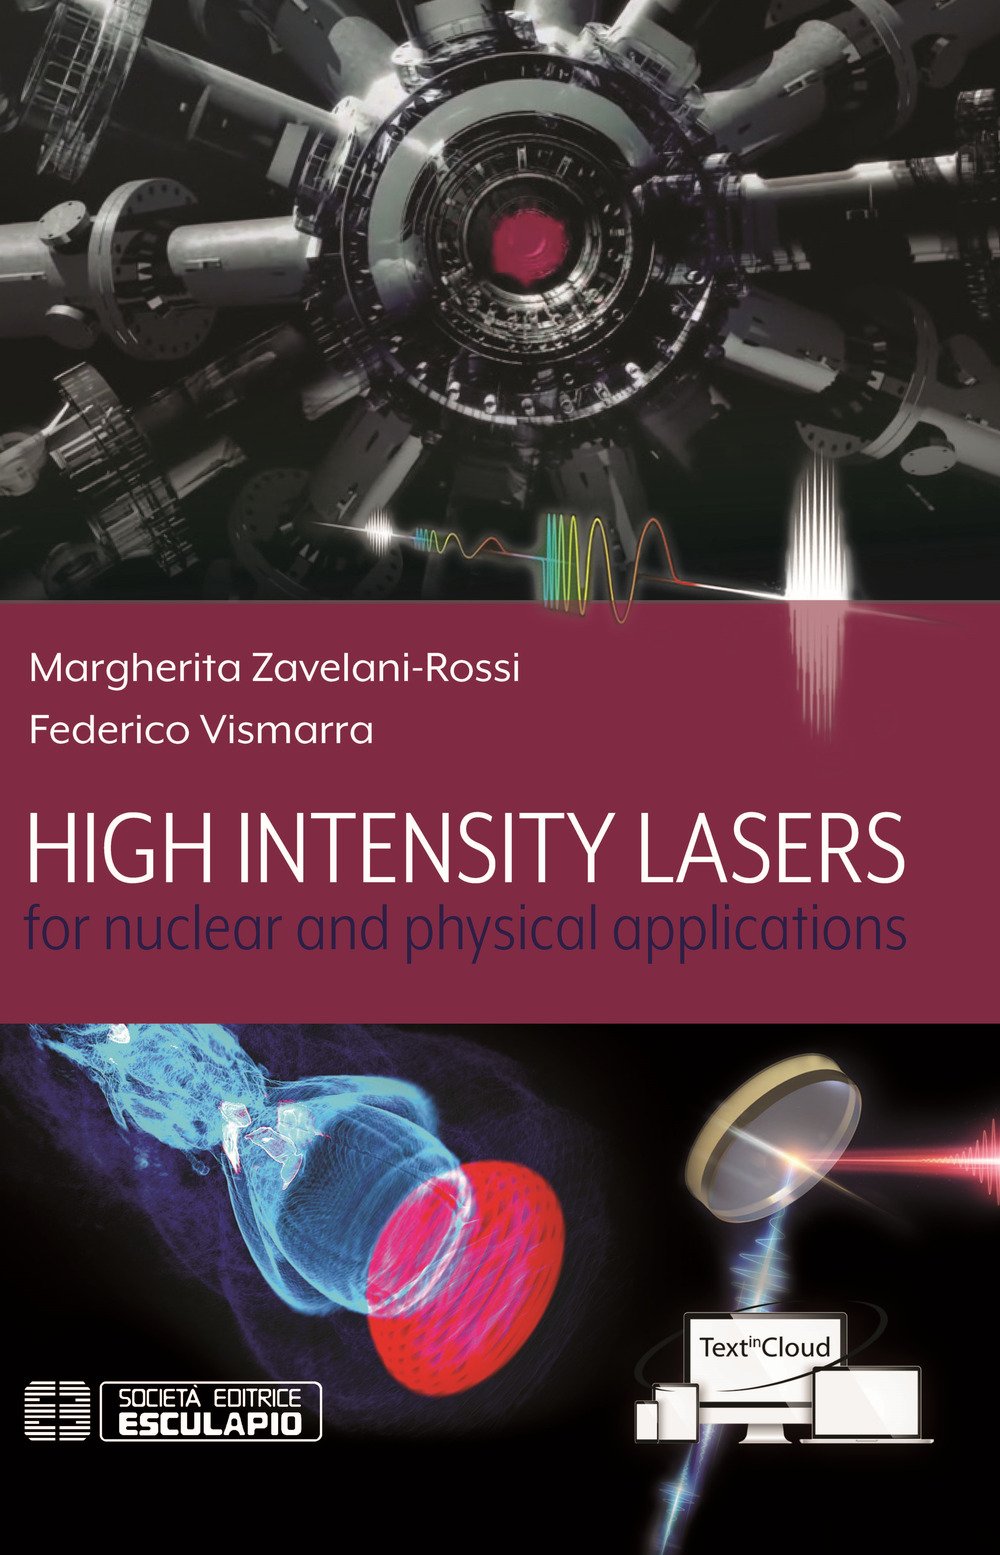 High intensity lasers for nuclear and physical applications